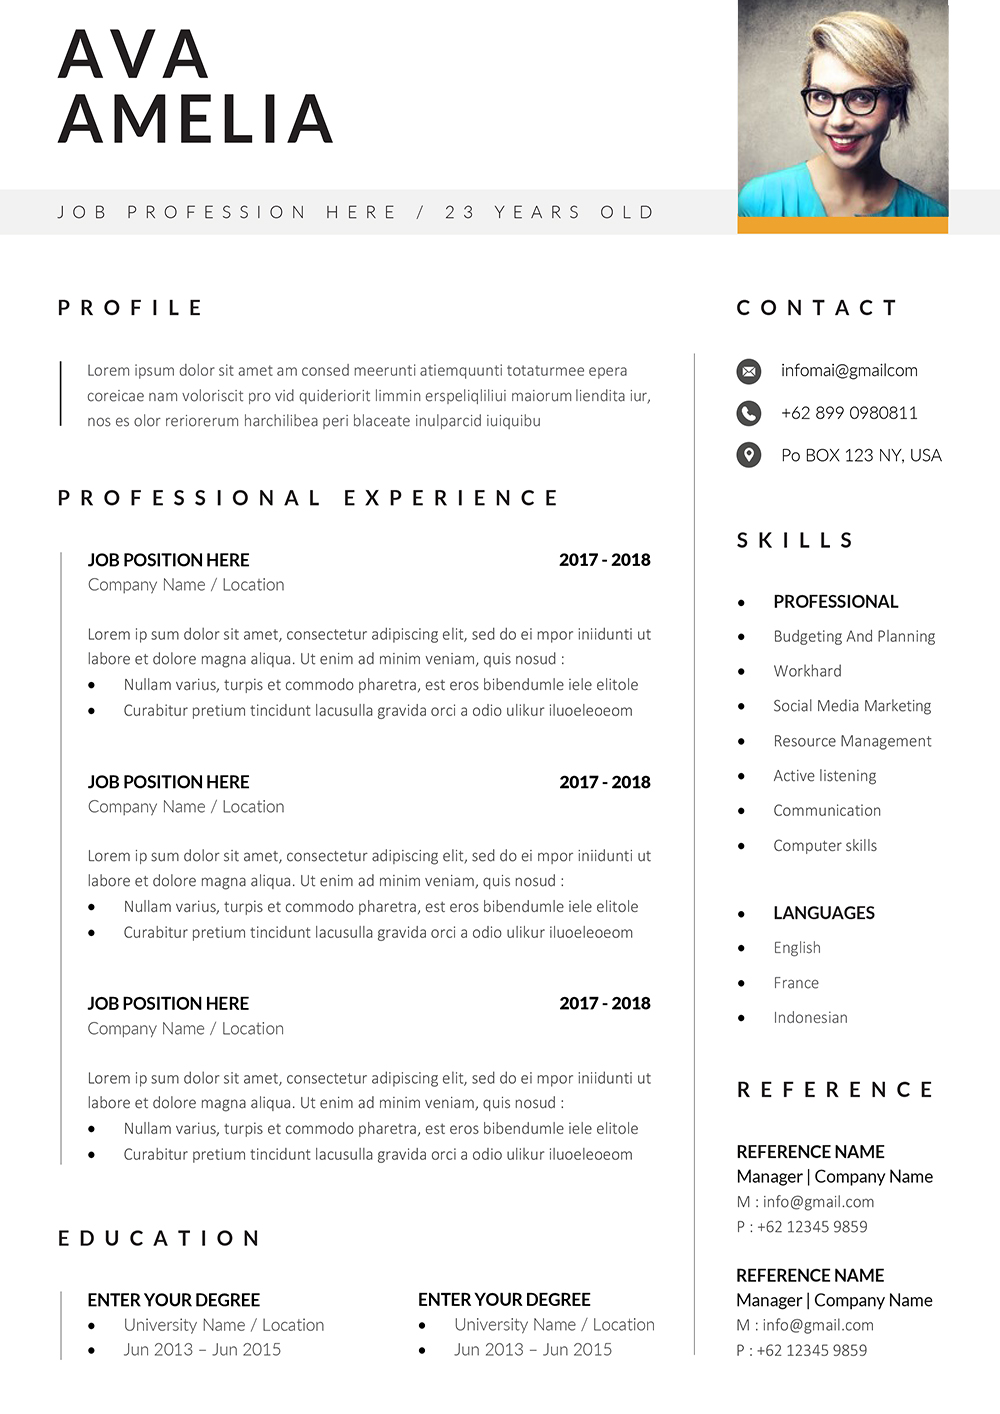 ats-friendly resume template free download 2021